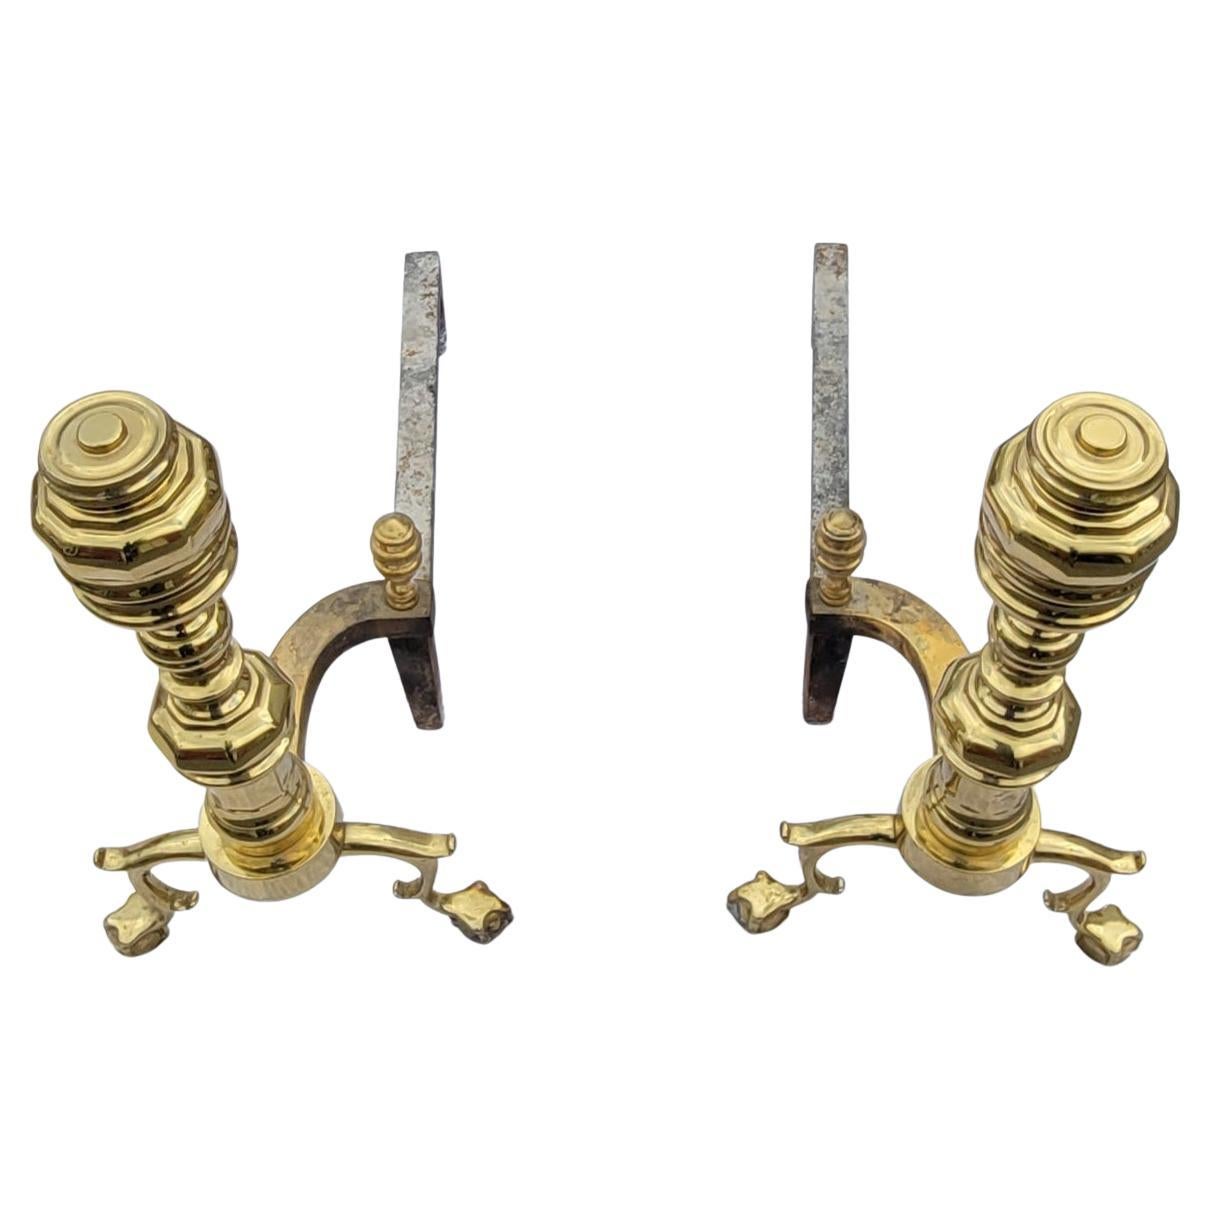 We are offering from a Richmond, Virginia estate a very fine pair of Virginia Metalcrafters (Harvin) brass andirons in the 